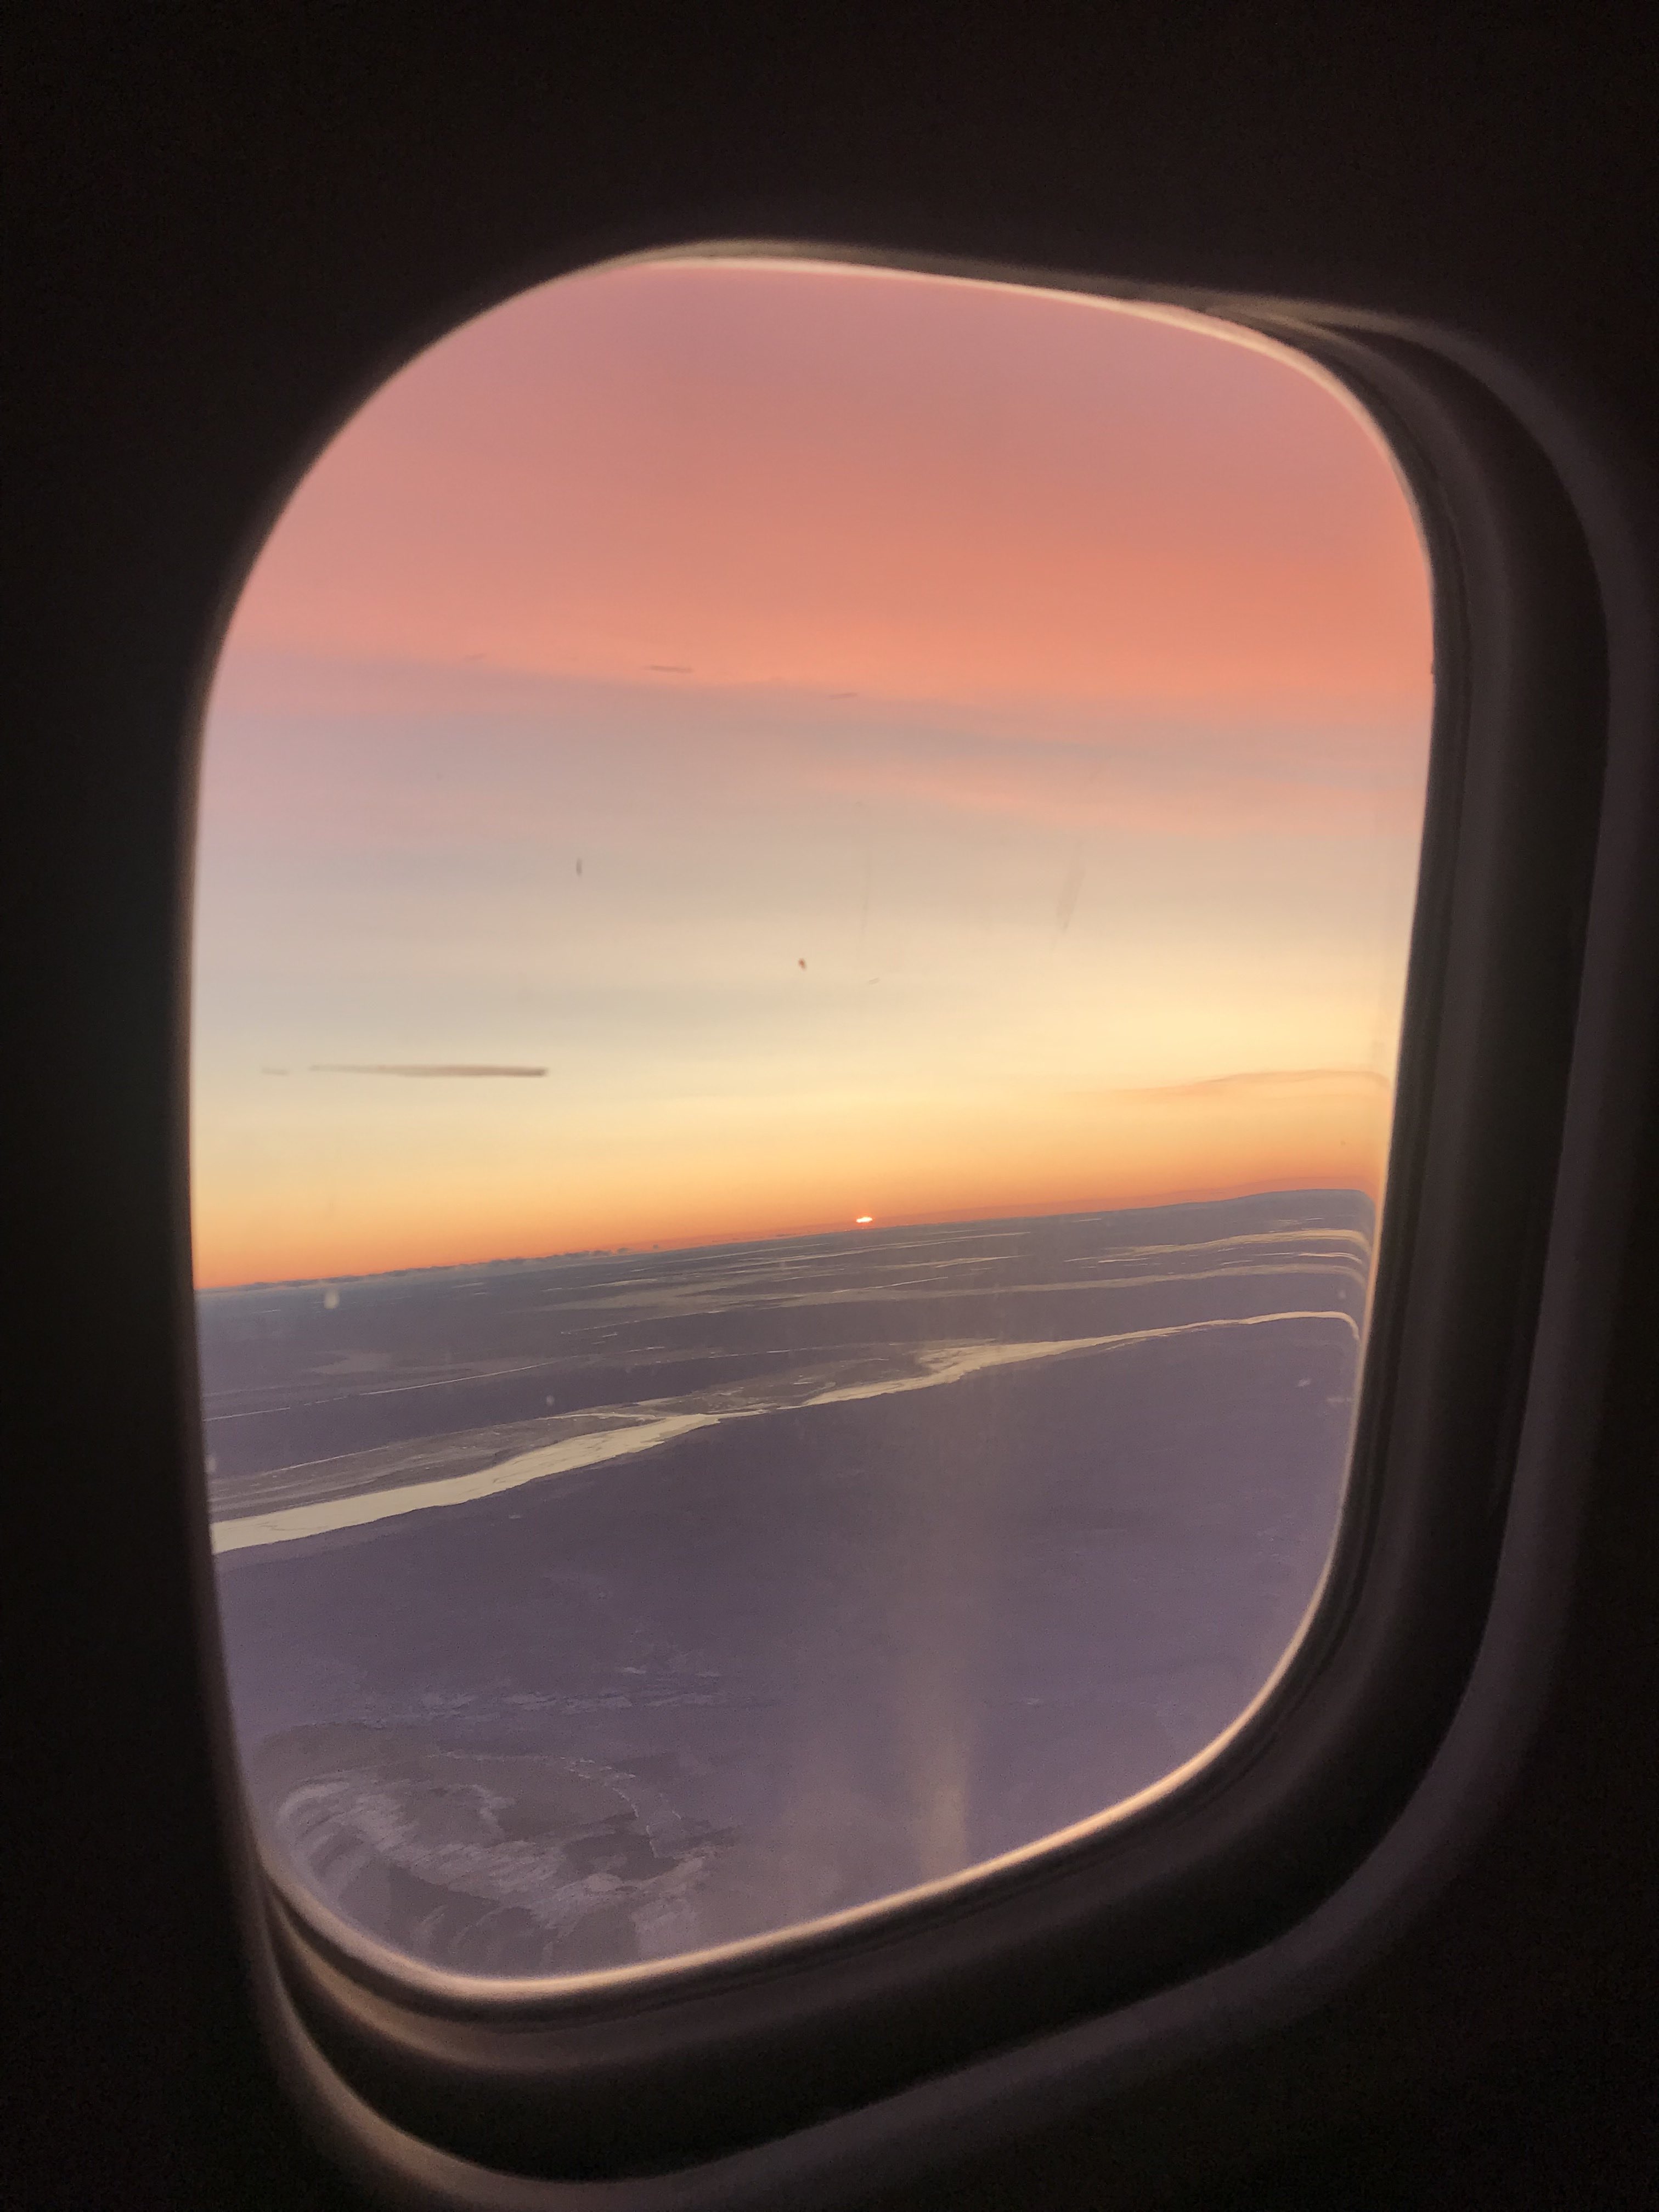 Sunrise over the Weddell Sea and sea ice below from the window of the DC-8